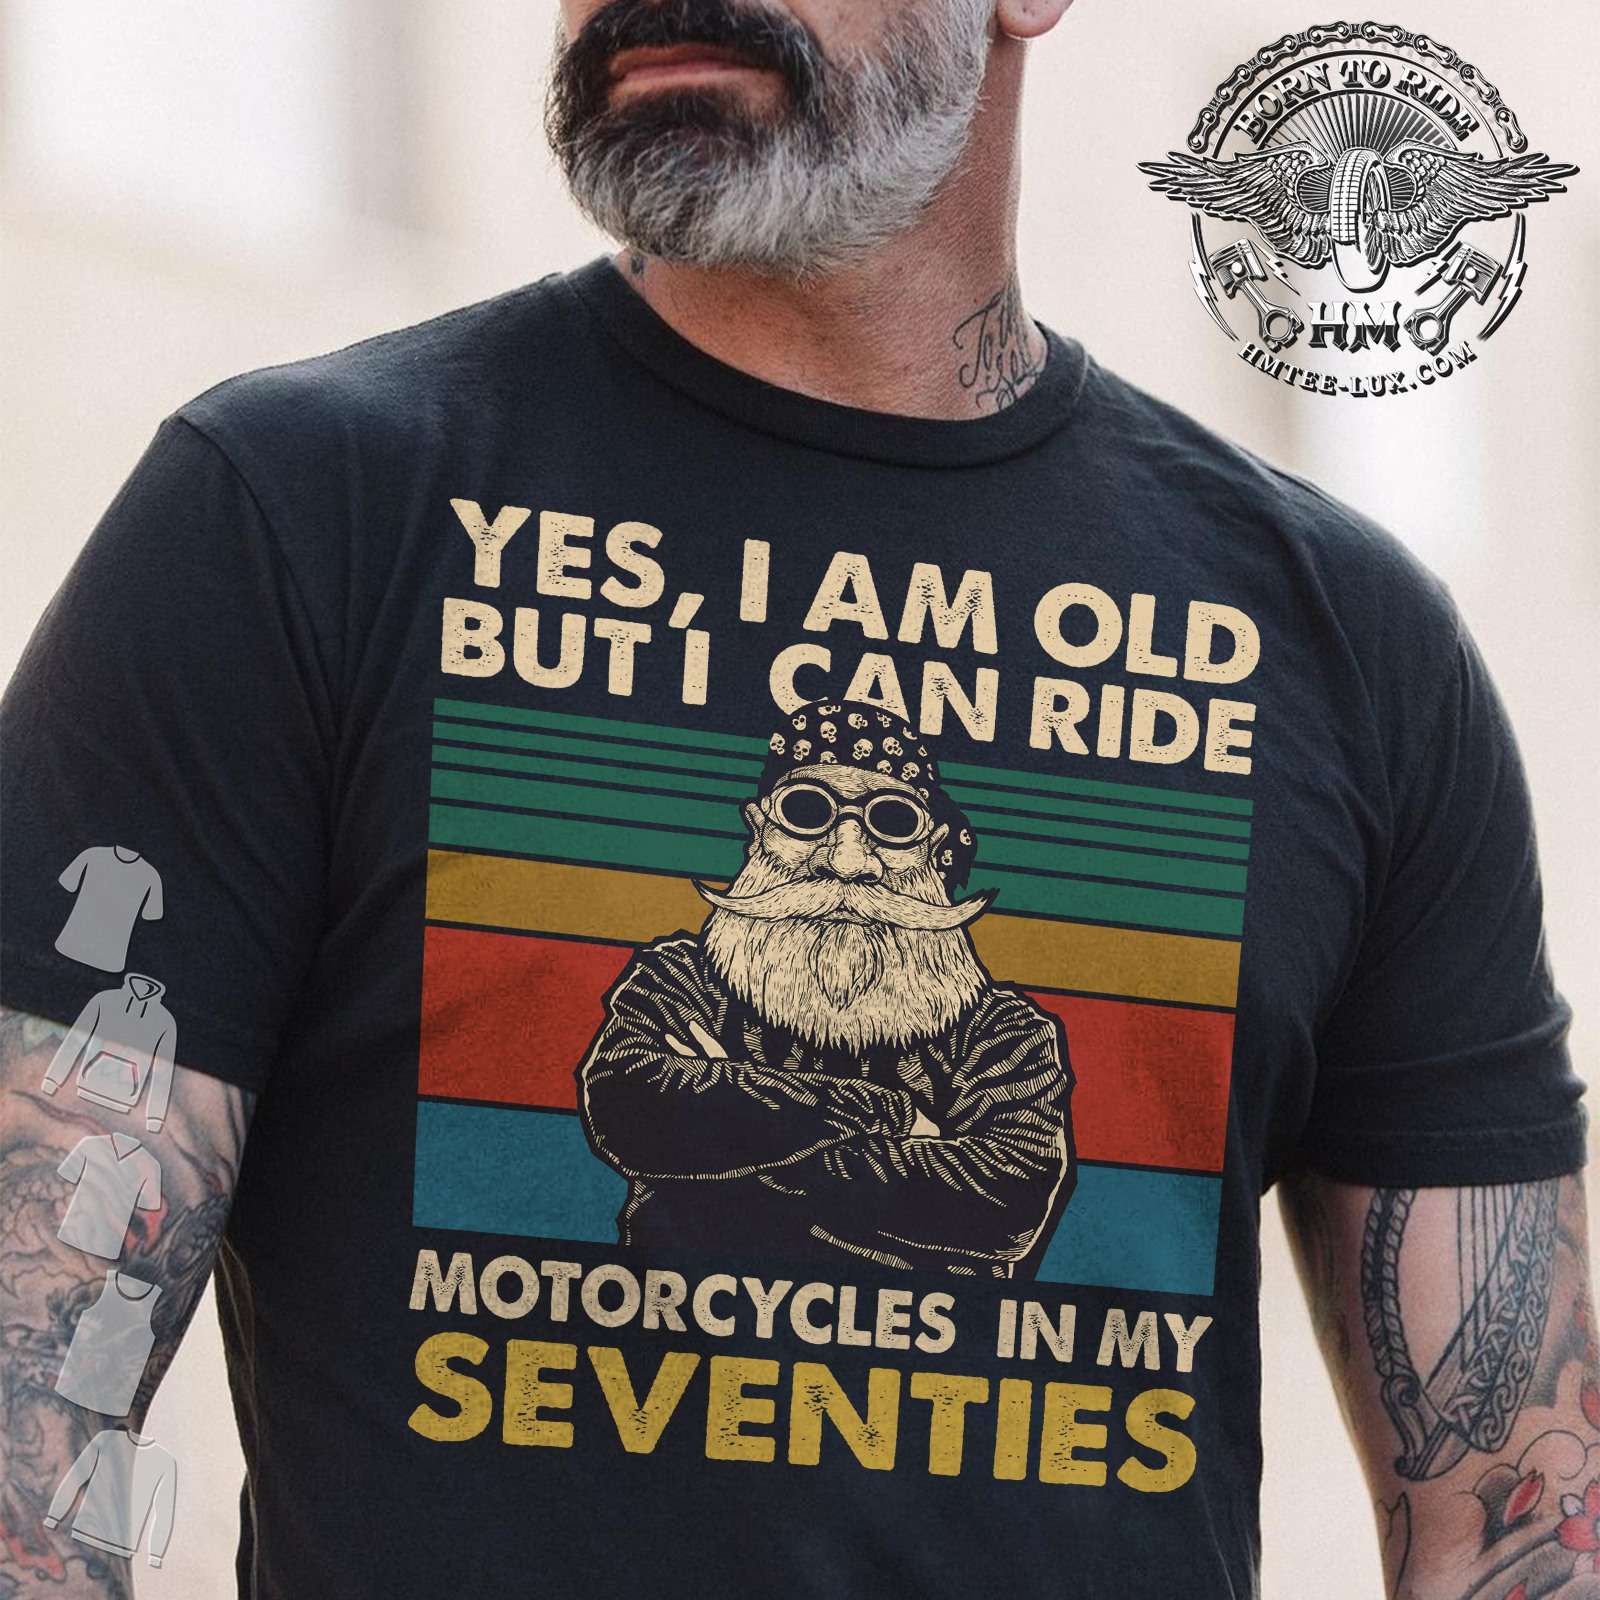 Yes I am old but I can ride motorcycles in my seventies - Old biker's gift